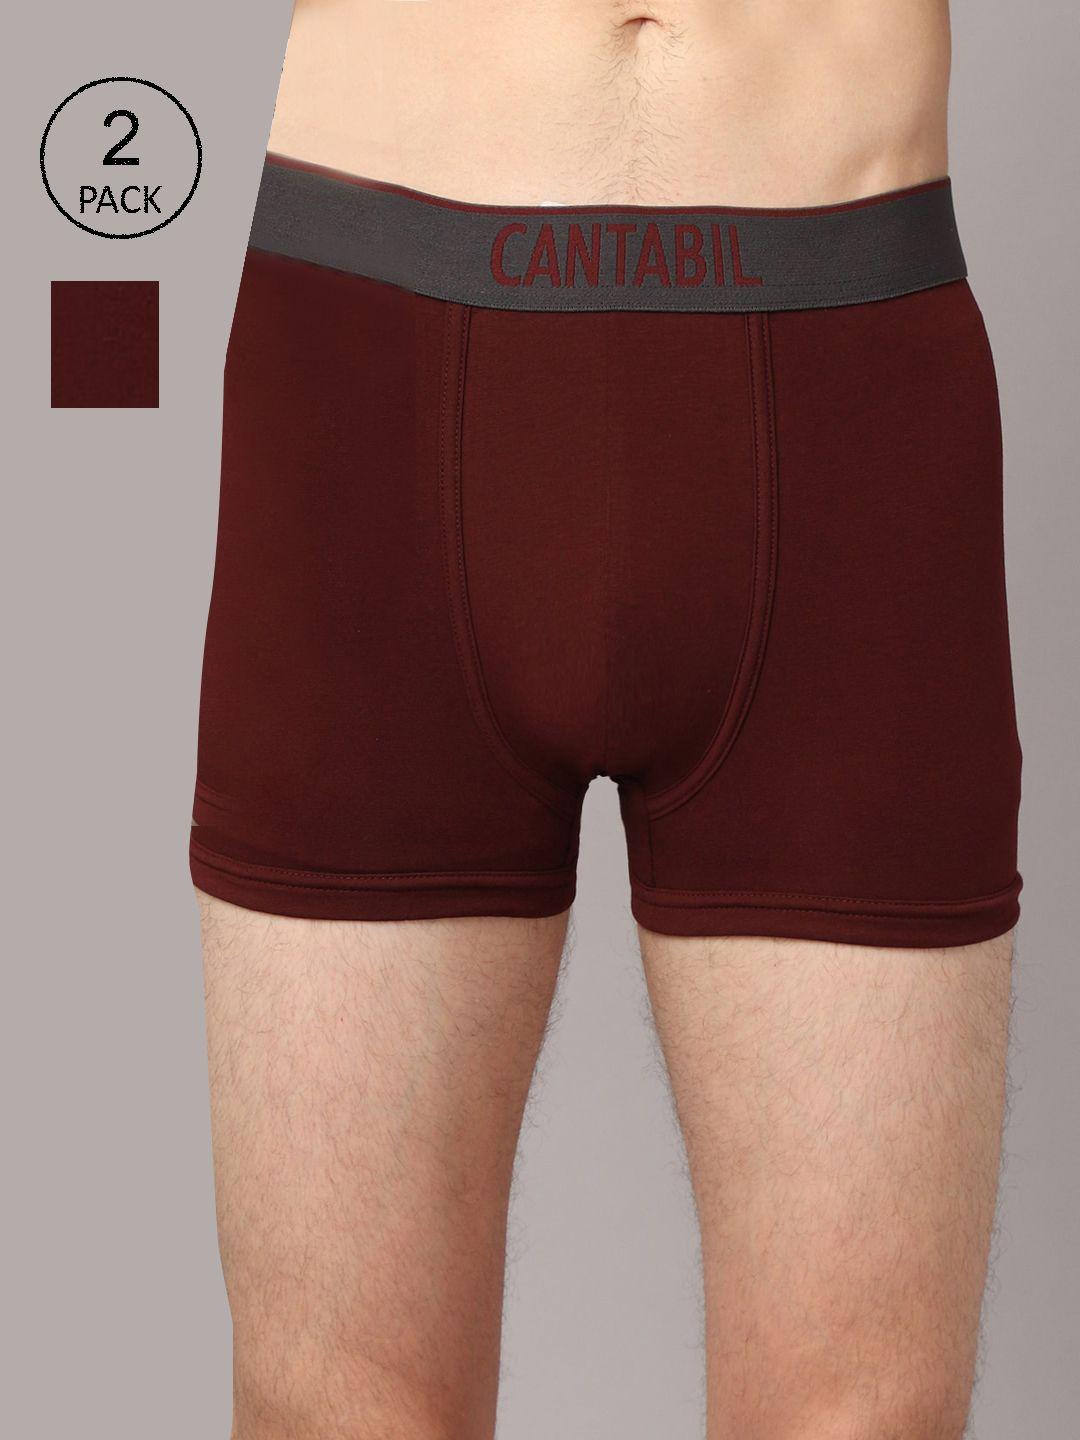 cantabil-men-pack-of-2-maroon-solid-basic-briefs